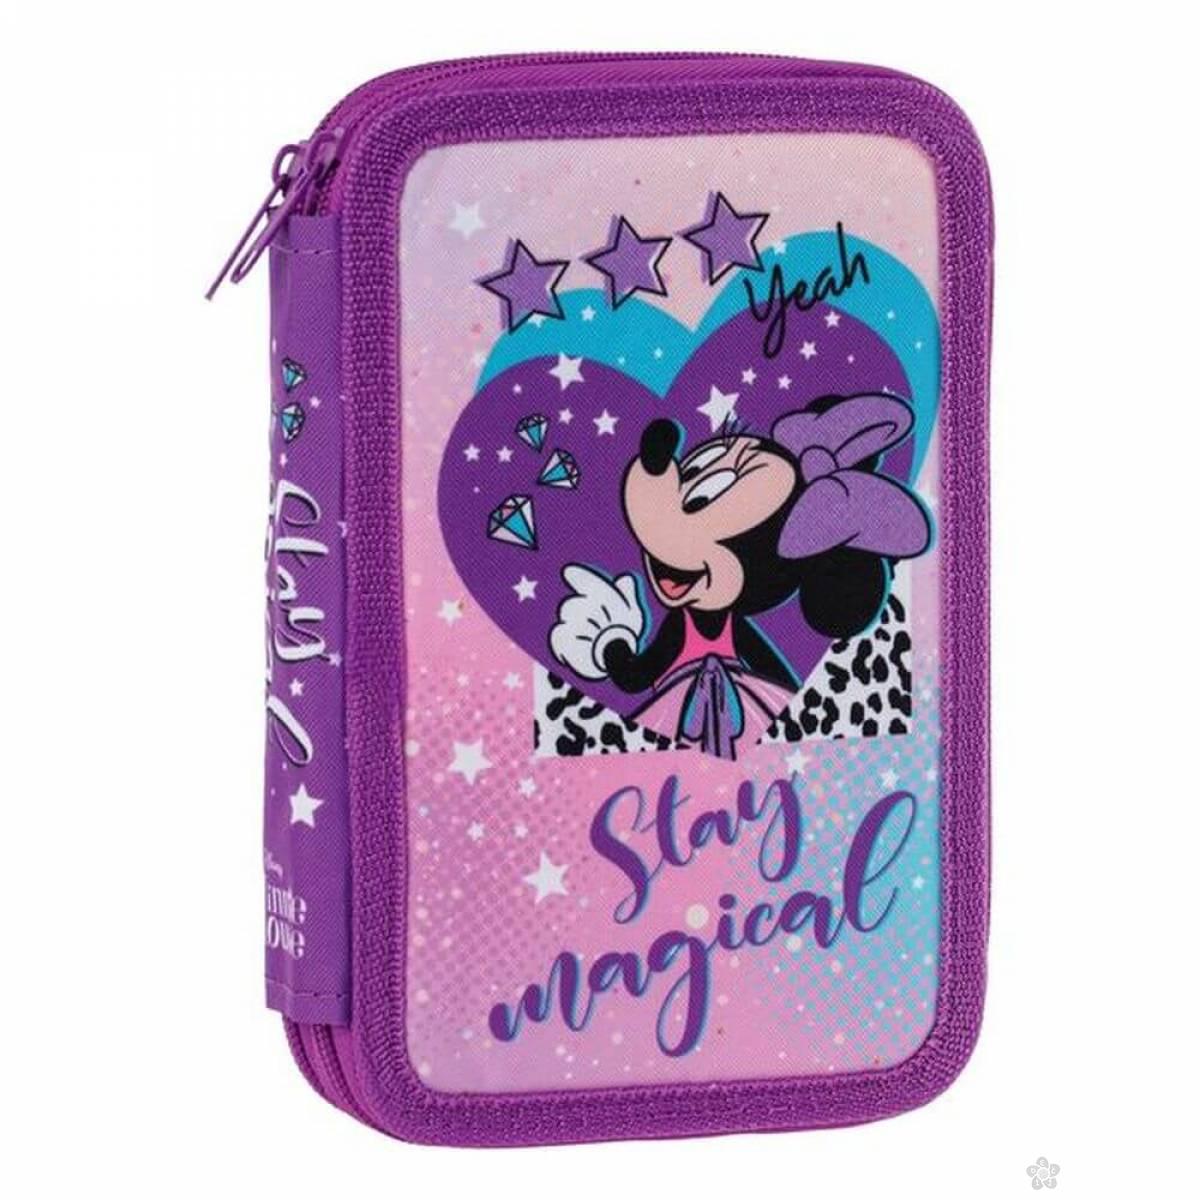 Pernica Minnie Mouse Stay magical 318447 